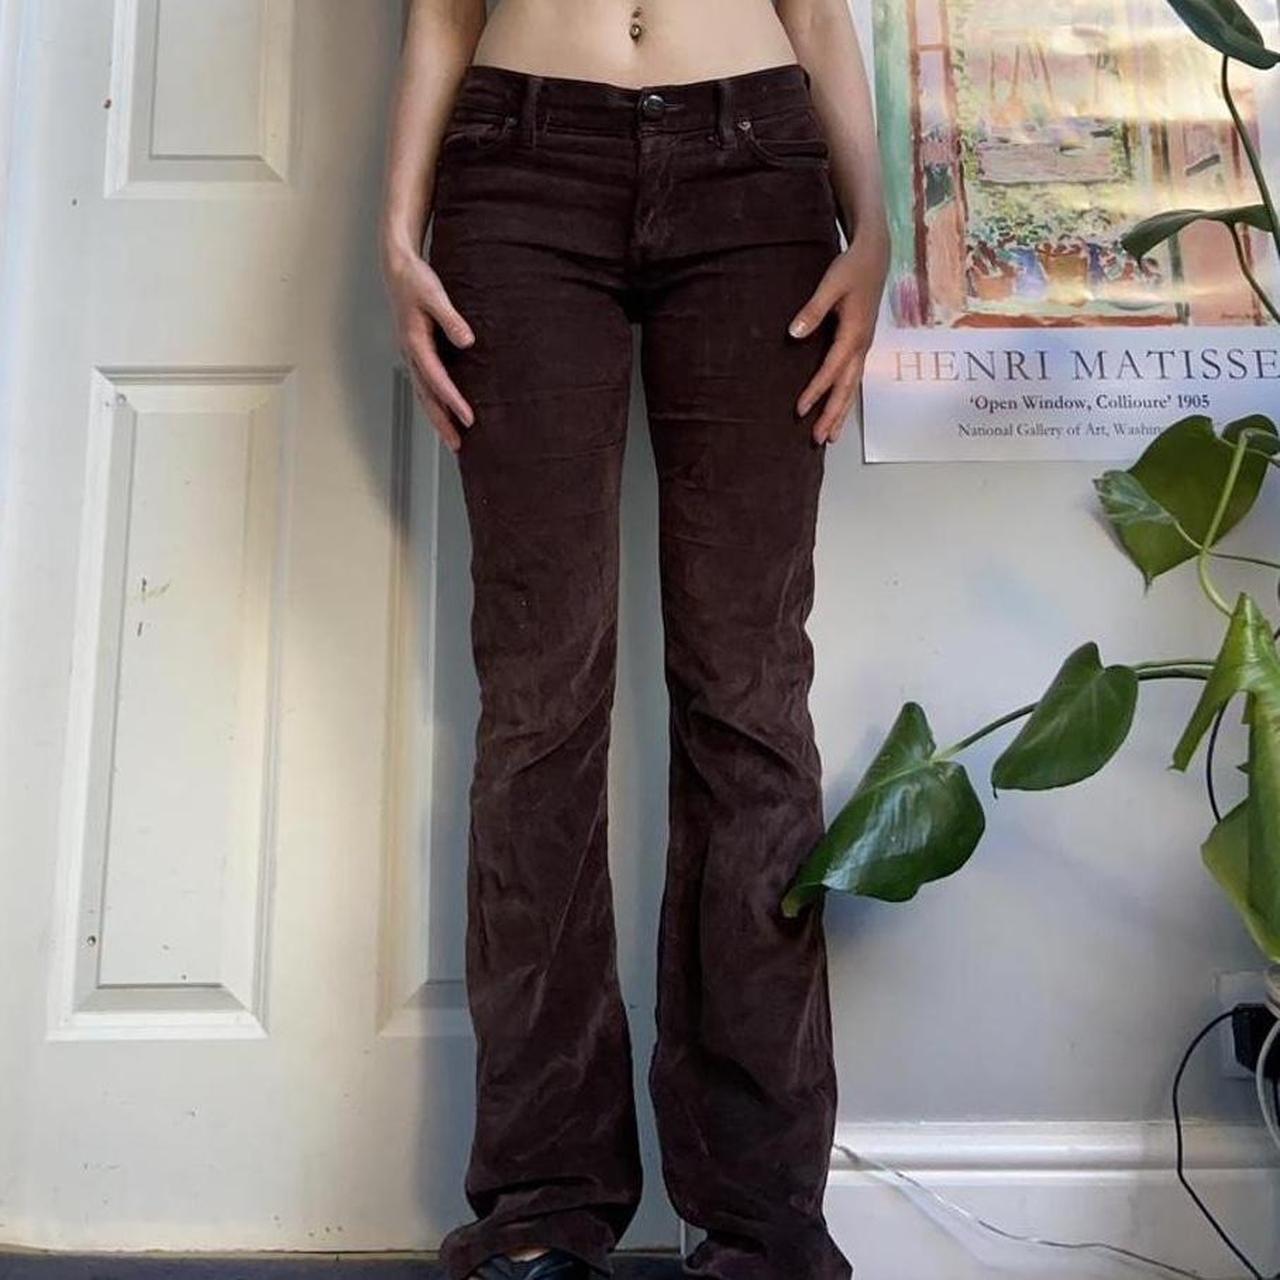 Vintage brown corduroy flares from citizens of... - Depop